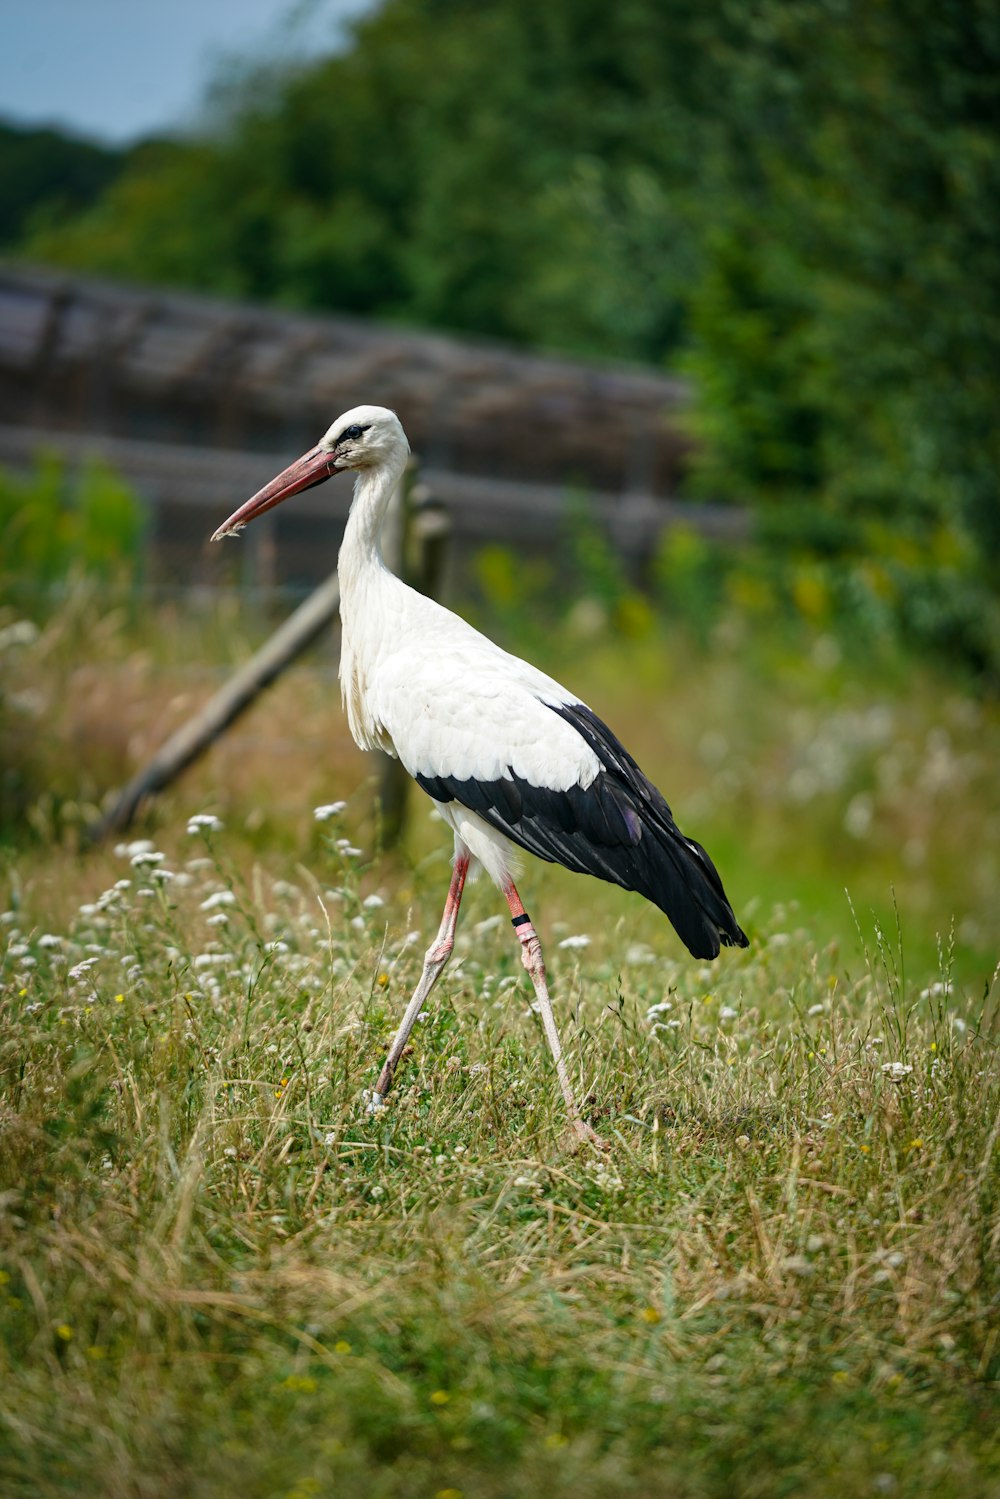 a bird standing in a grassy area